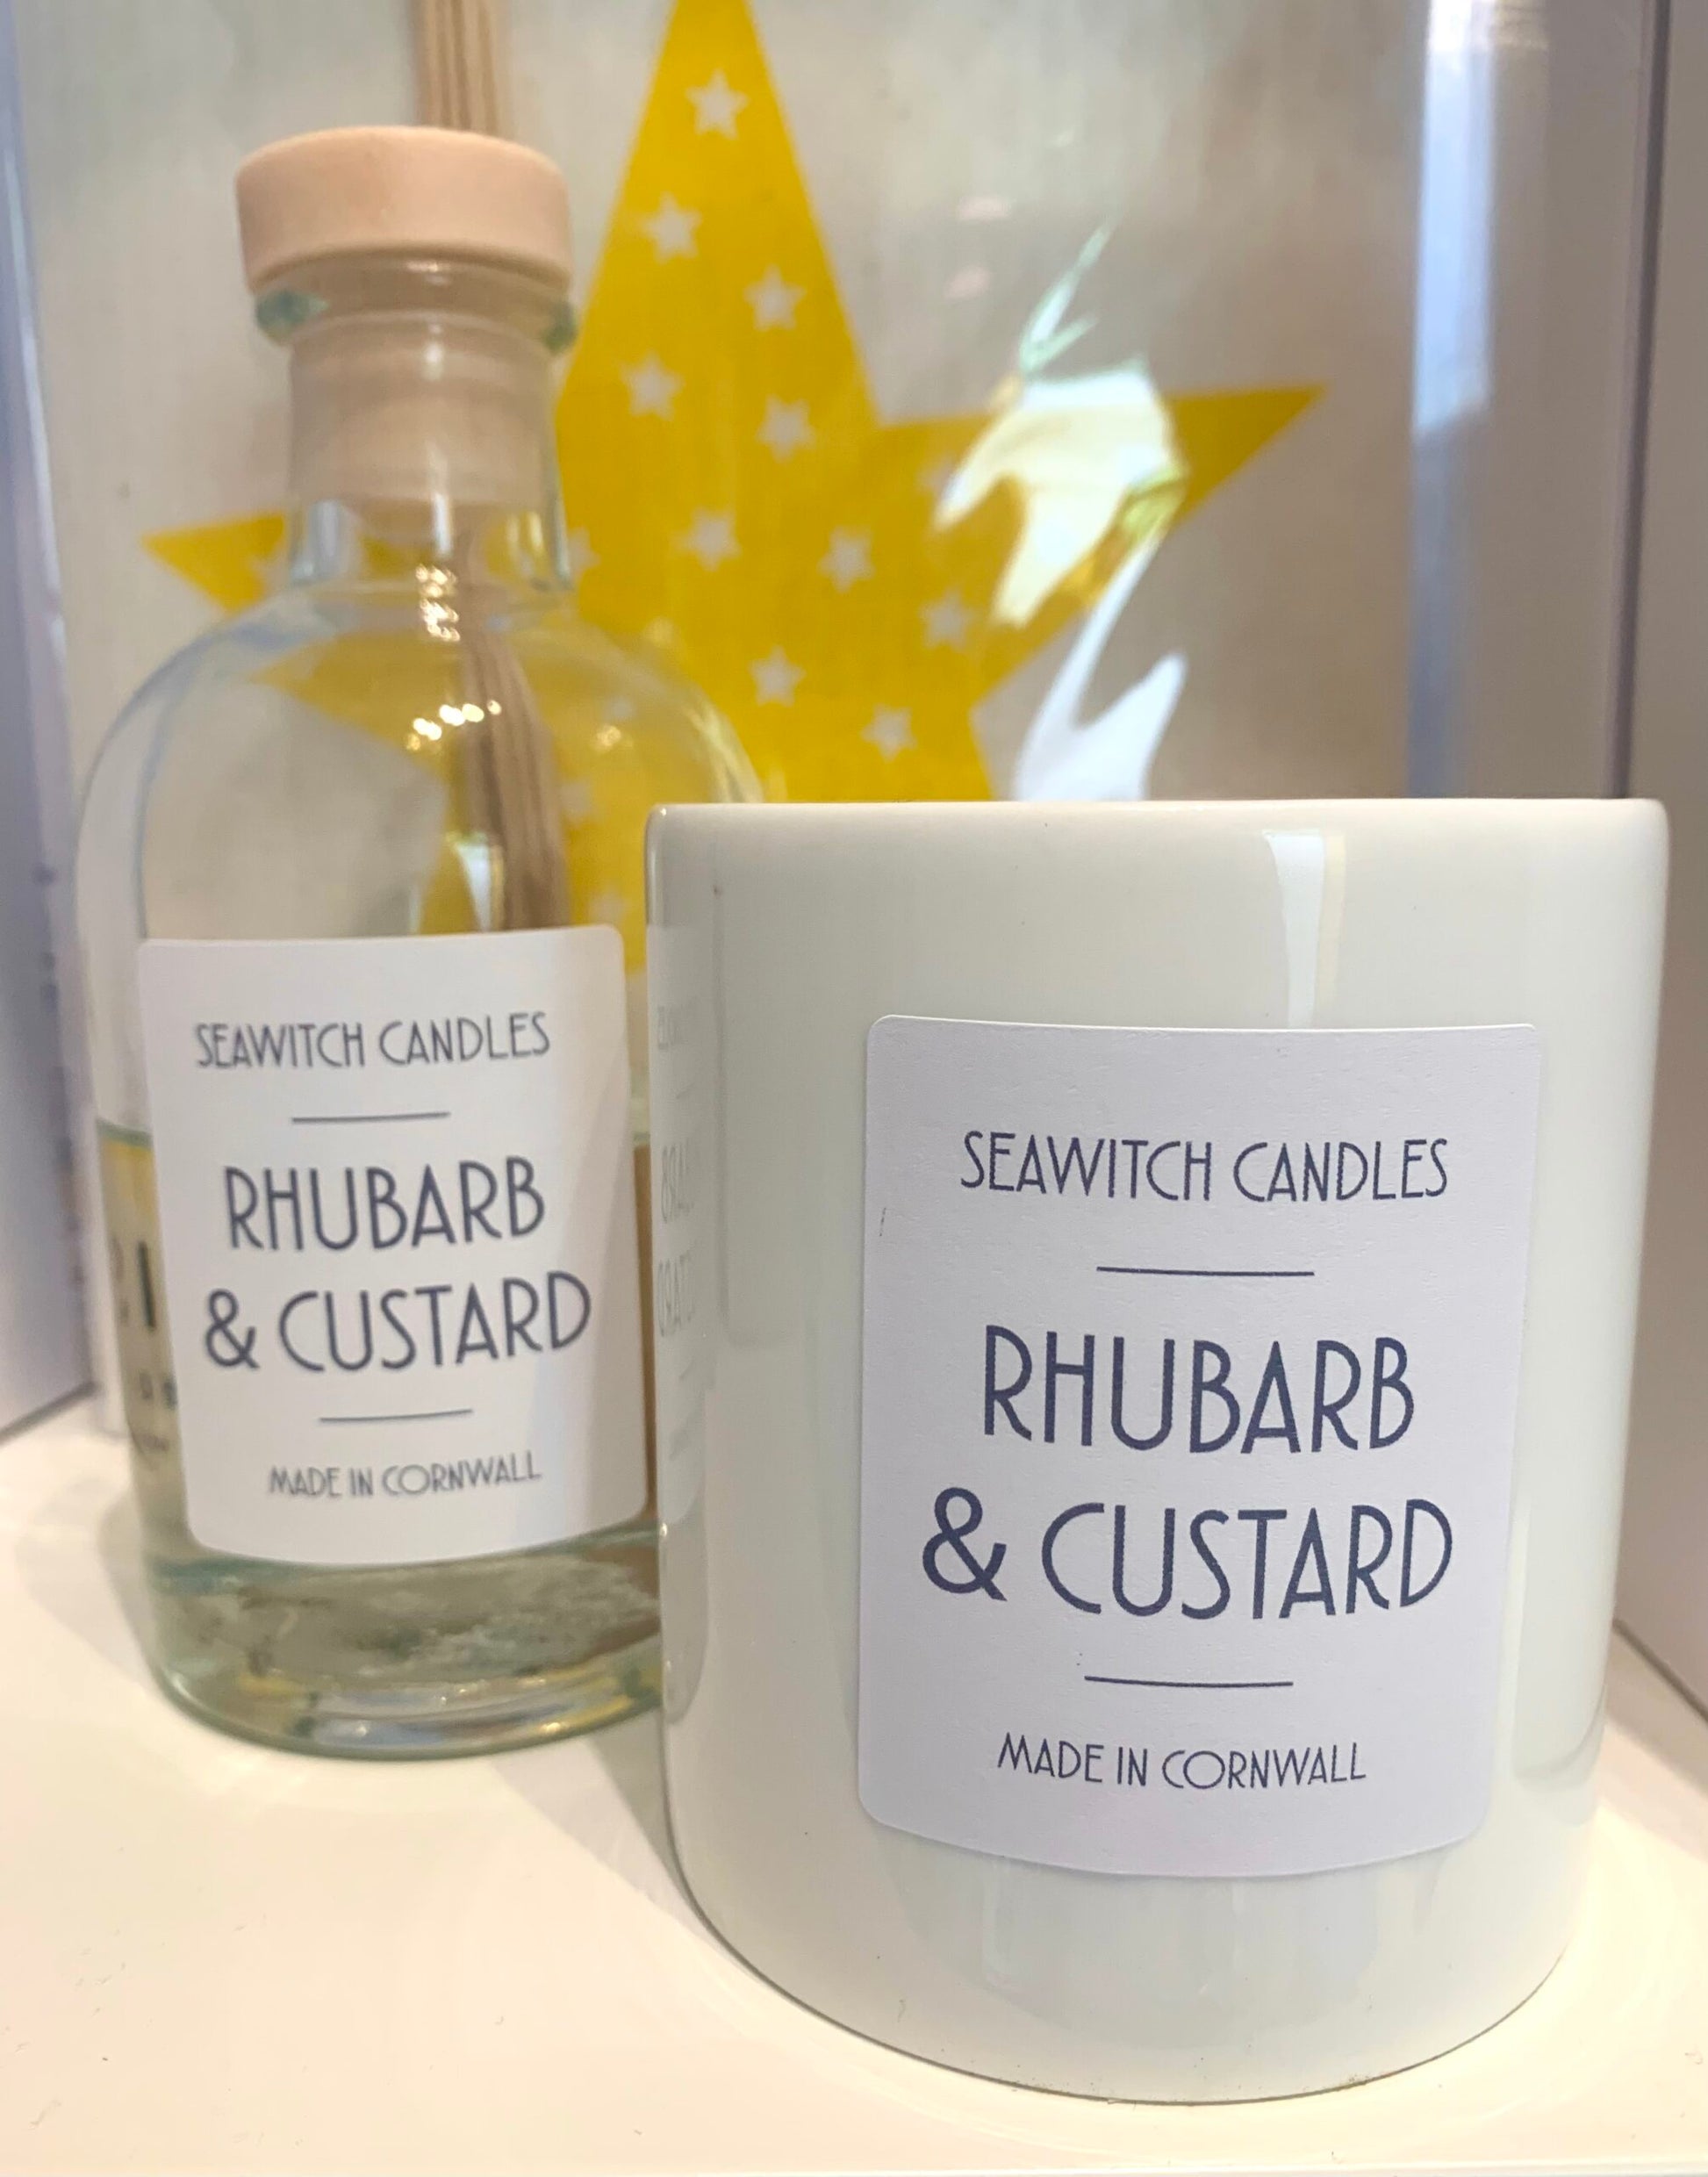 Rhubarb &amp; Custard Scented Candle&nbsp;  £20  The perfect duo: tart pink rhubarb and creamy vanilla custard  &nbsp;Burn time of at least 50 hours  Ingredients: natural vegan plant wax, fragrance oils, cotton wick  This candle is hand poured into a white china pot and is made in Mousehole, Cornwall by Seawitch Candles